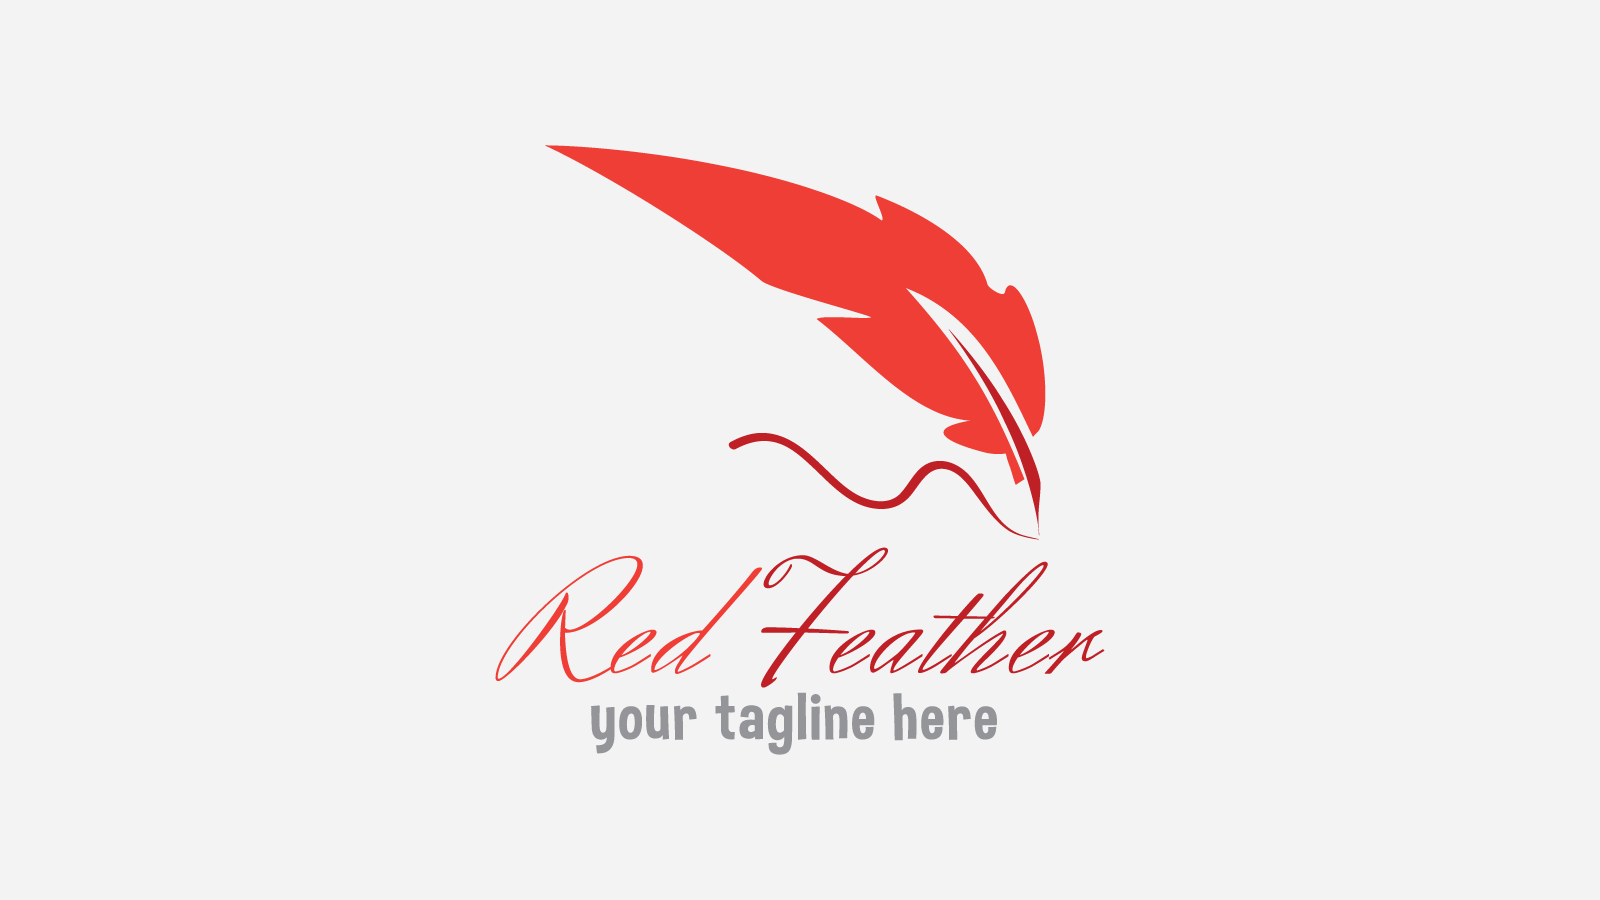 Red Feather Logo - RedFeather free logo design. Zfreegraphic: Free vector logo downloads